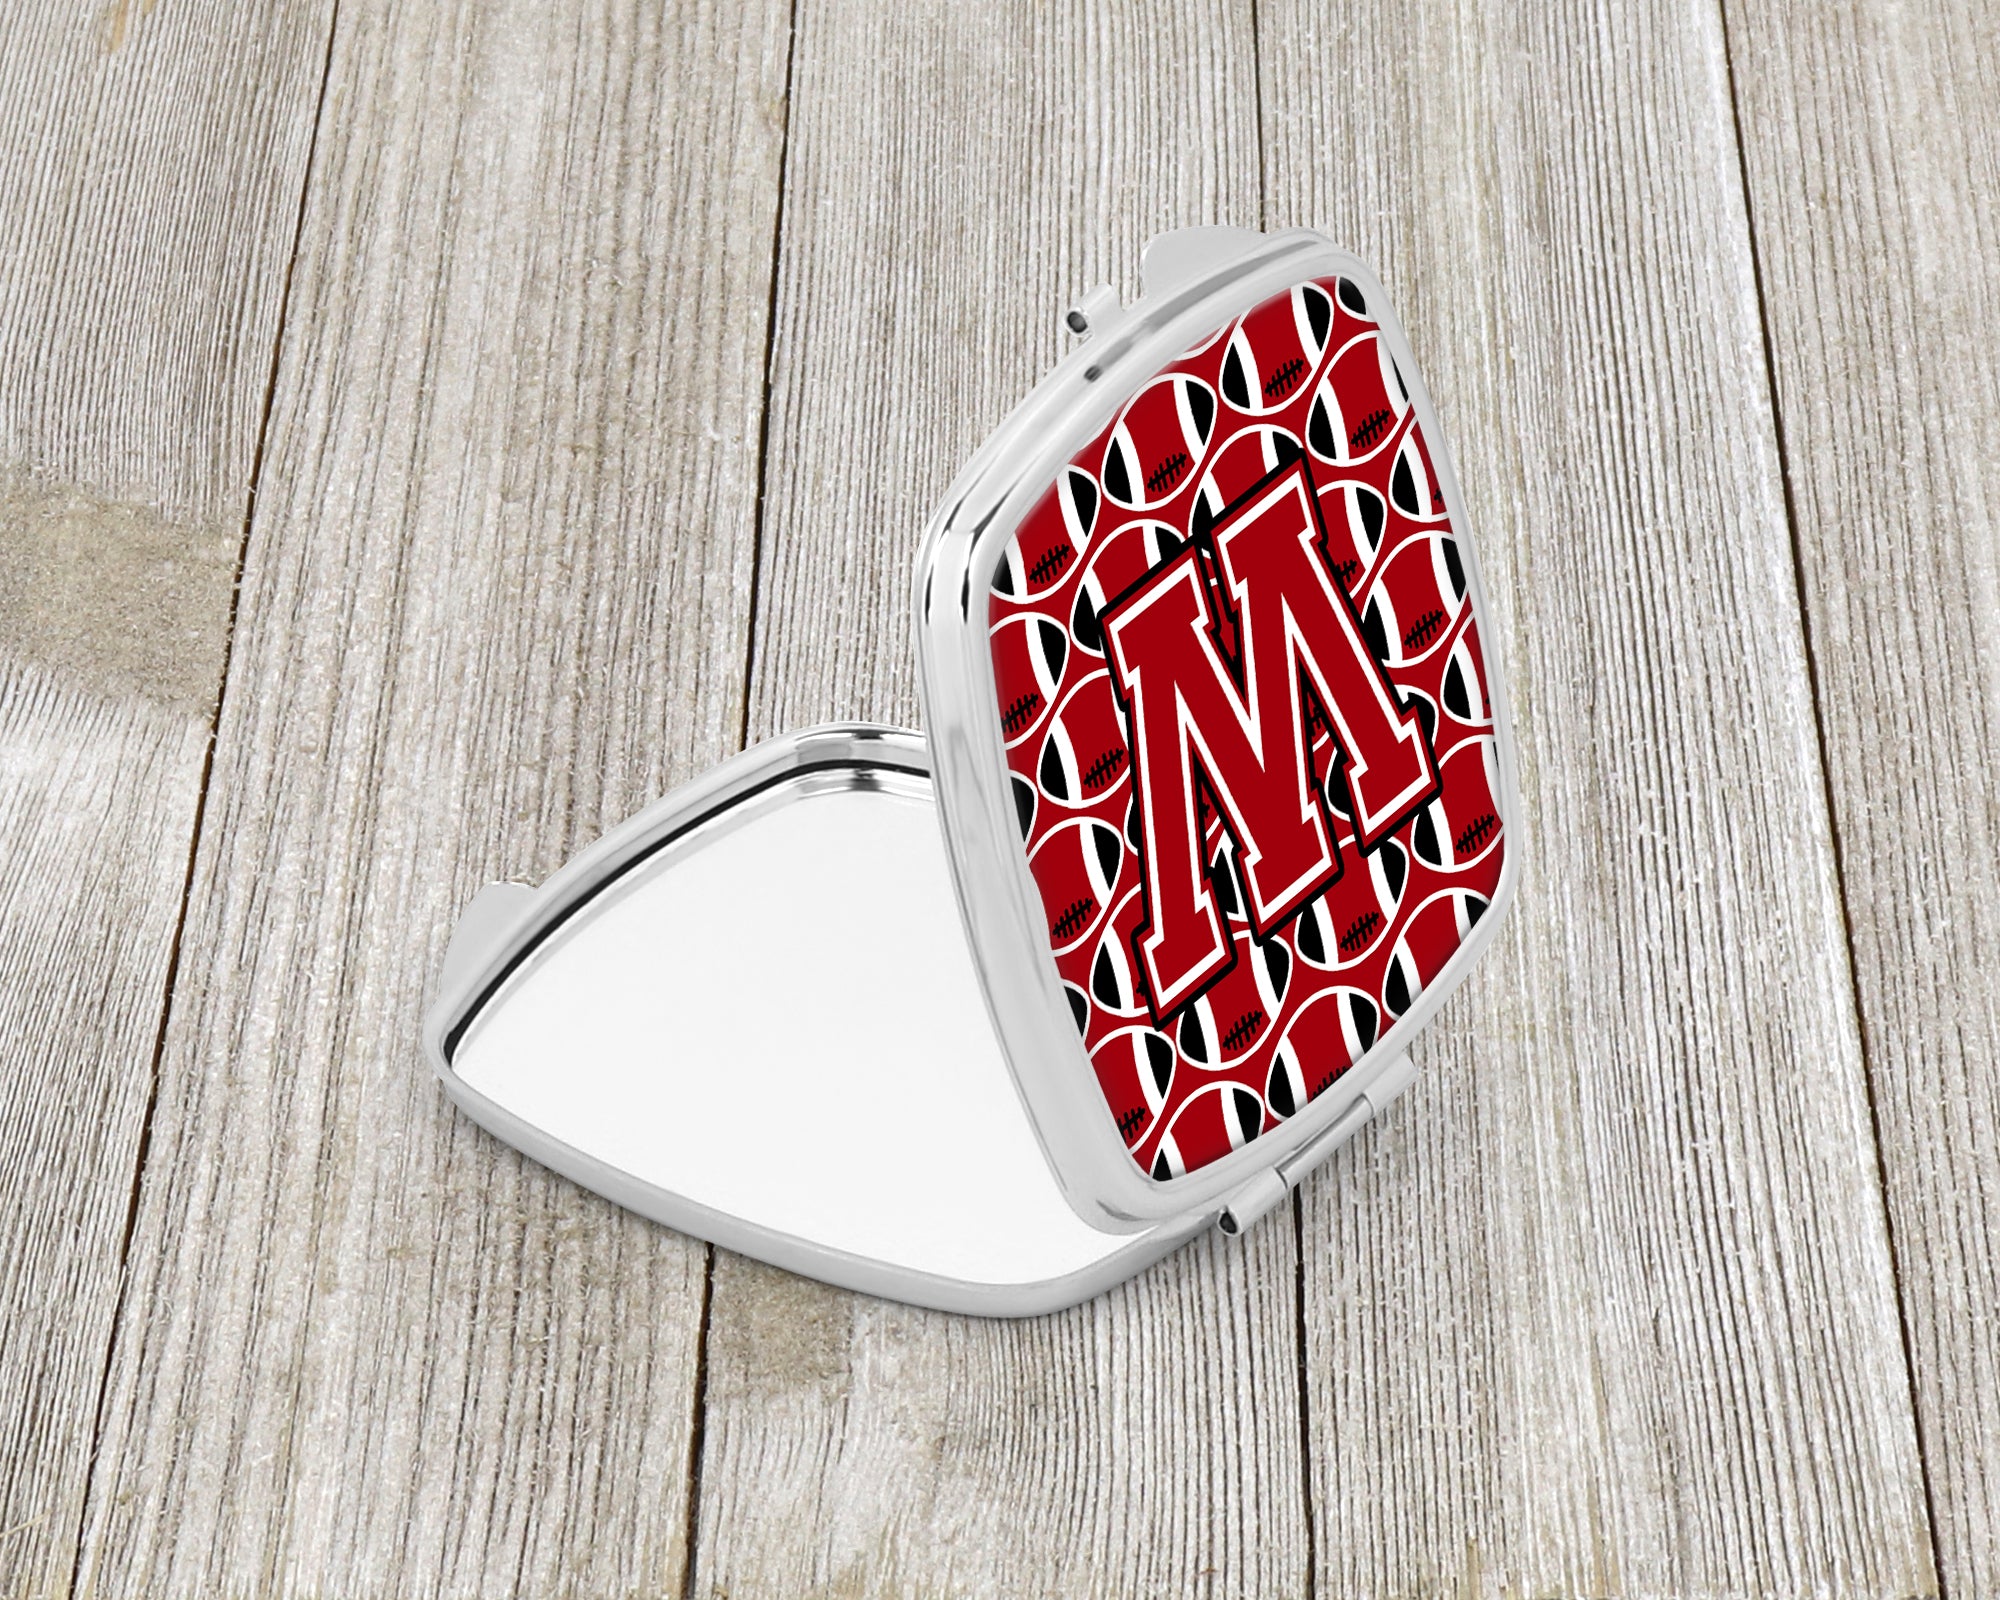 Letter W Football Red, Black and White Compact Mirror CJ1073-WSCM  the-store.com.